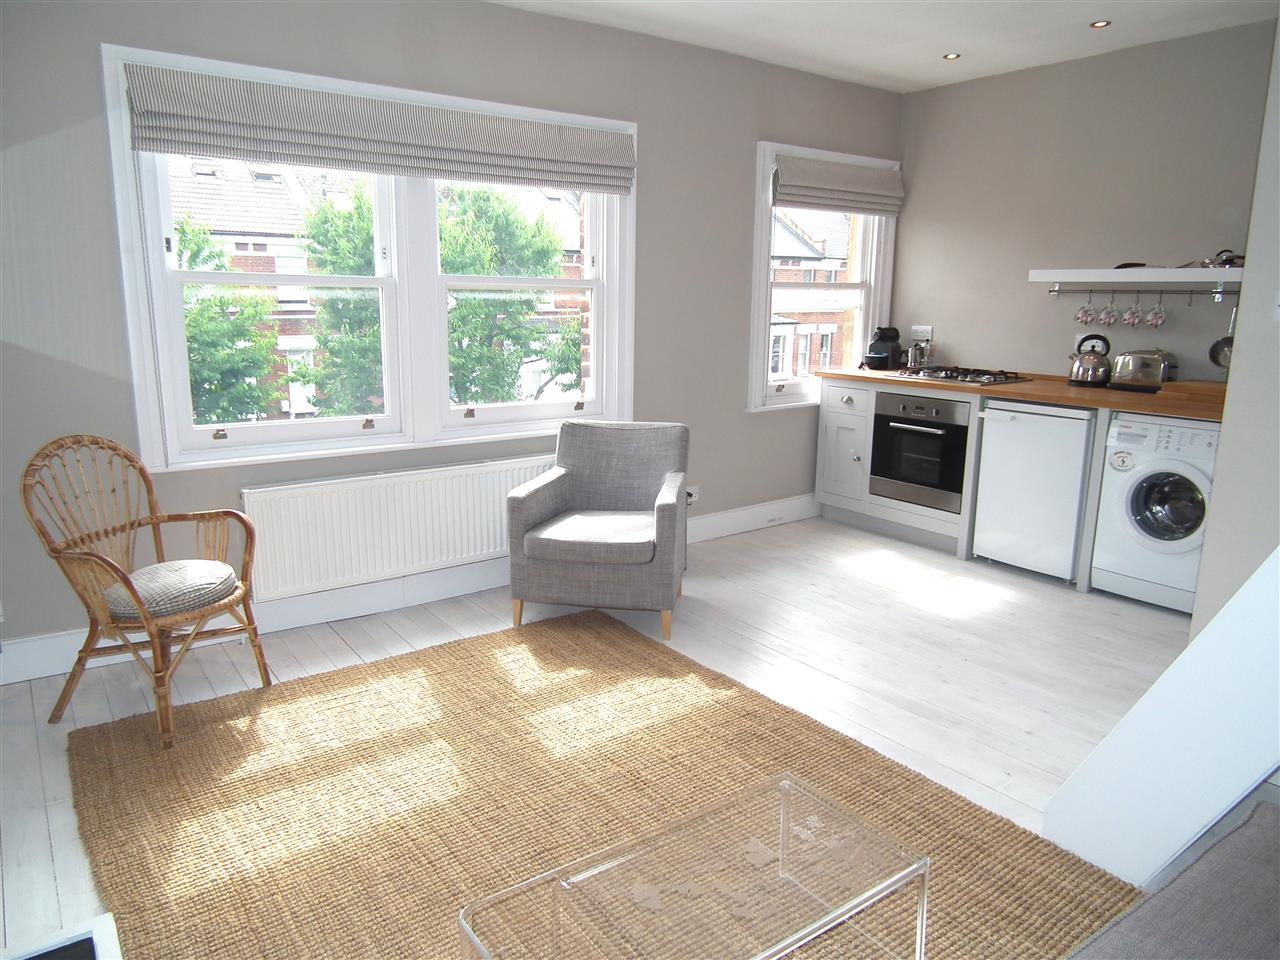 2 bed flat to rent in Beversbrook Road - Property Image 1